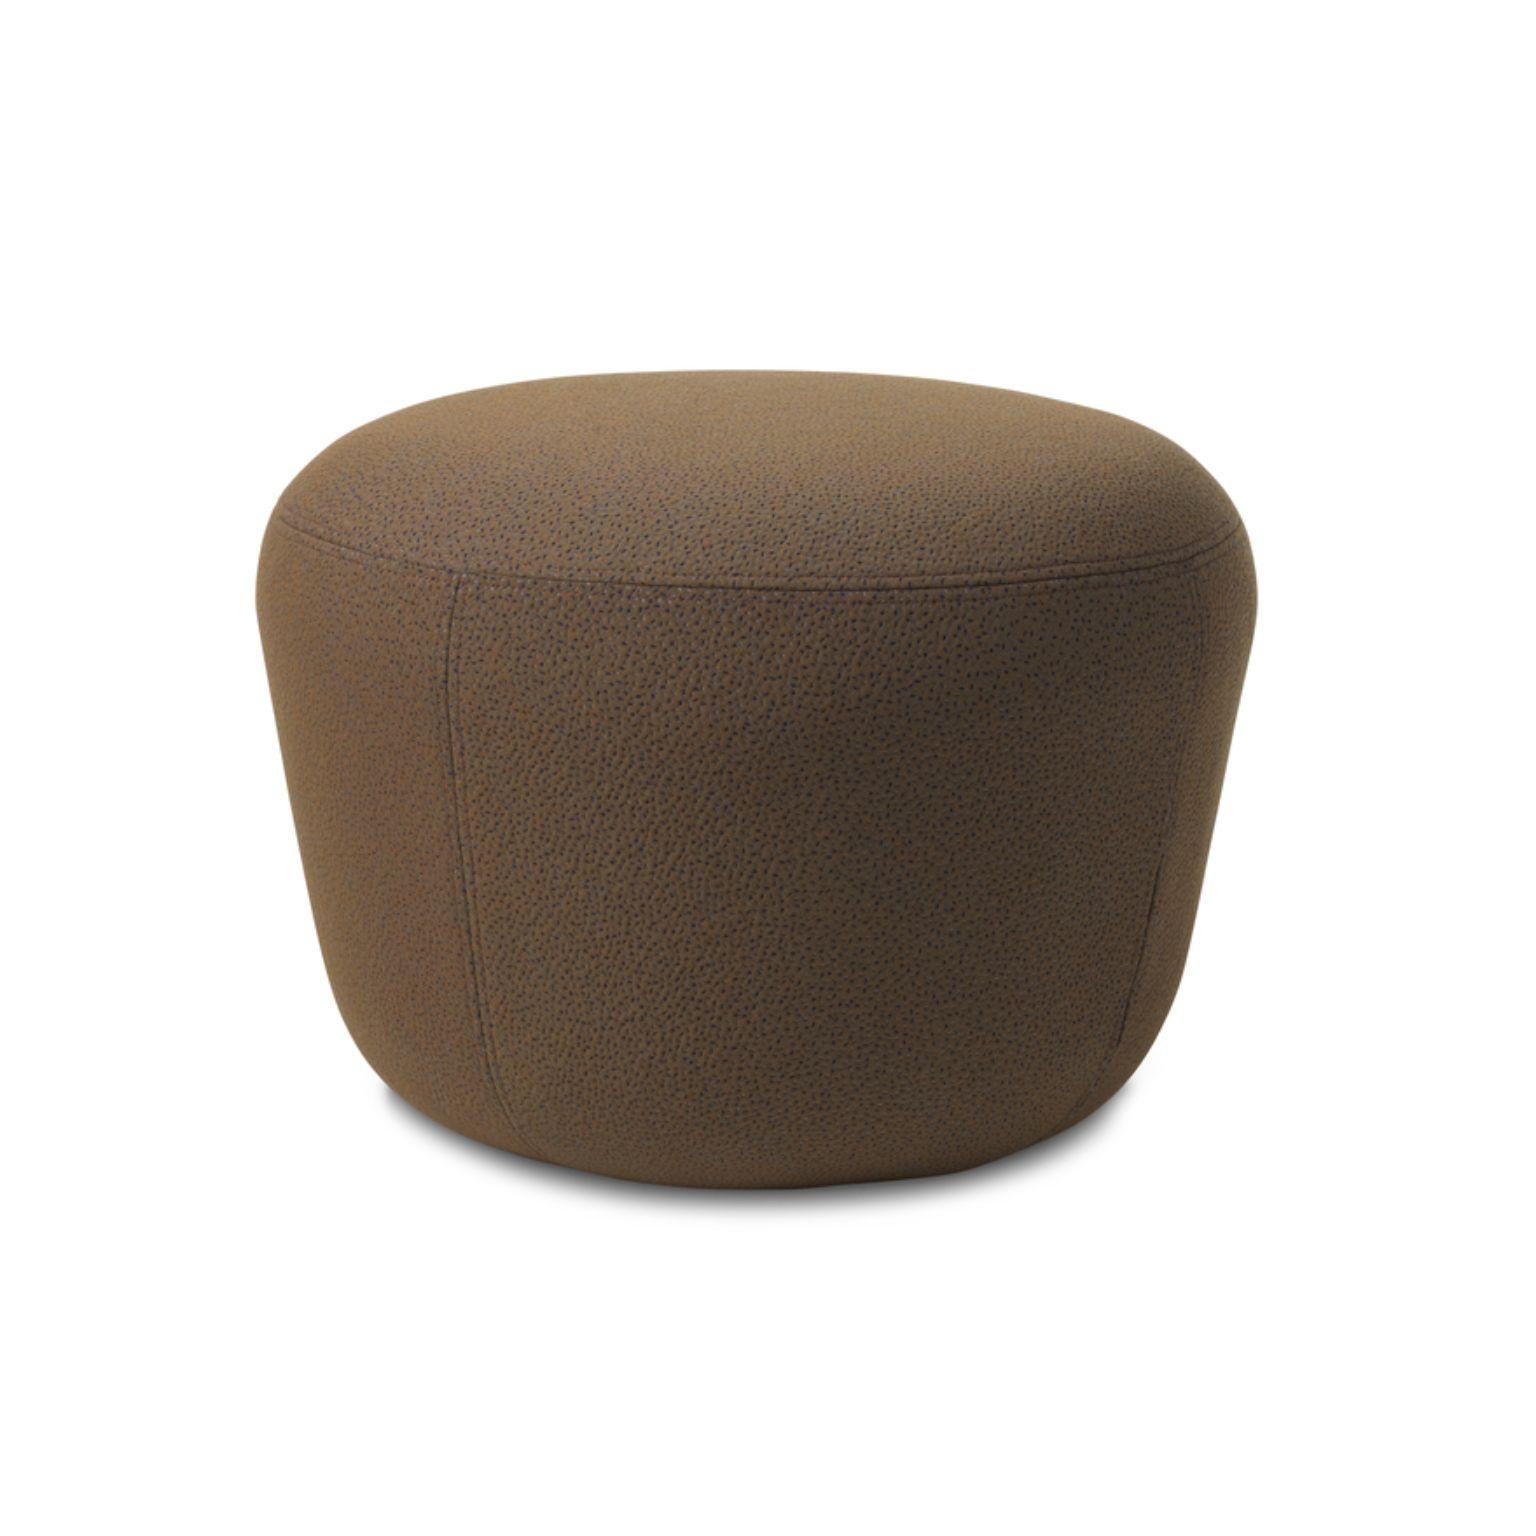 Haven sprinkles cappuccino brown pouf by Warm Nordic
Dimensions: D57 x H 40 cm
Material: Textile upholstery, Foam, Wood.
Weight: 9.5 kg
Also available in different colours and finishes. 

The Haven Pouf is a contemporary pouf with a simple,